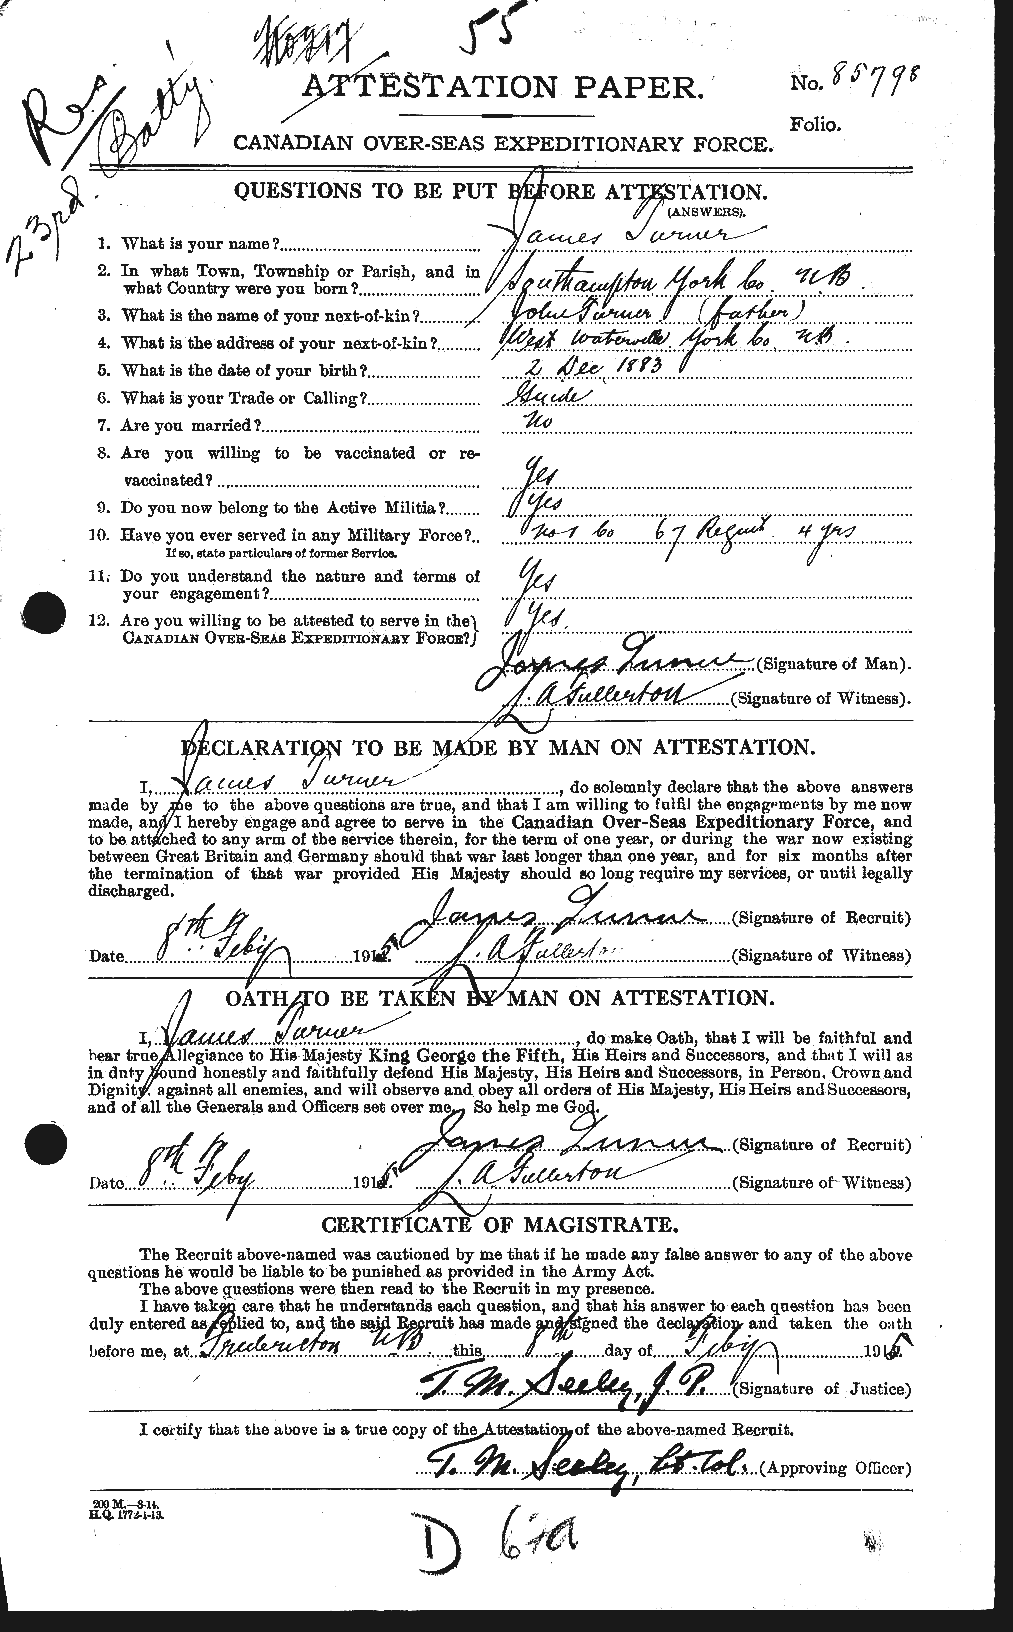 Personnel Records of the First World War - CEF 641990a